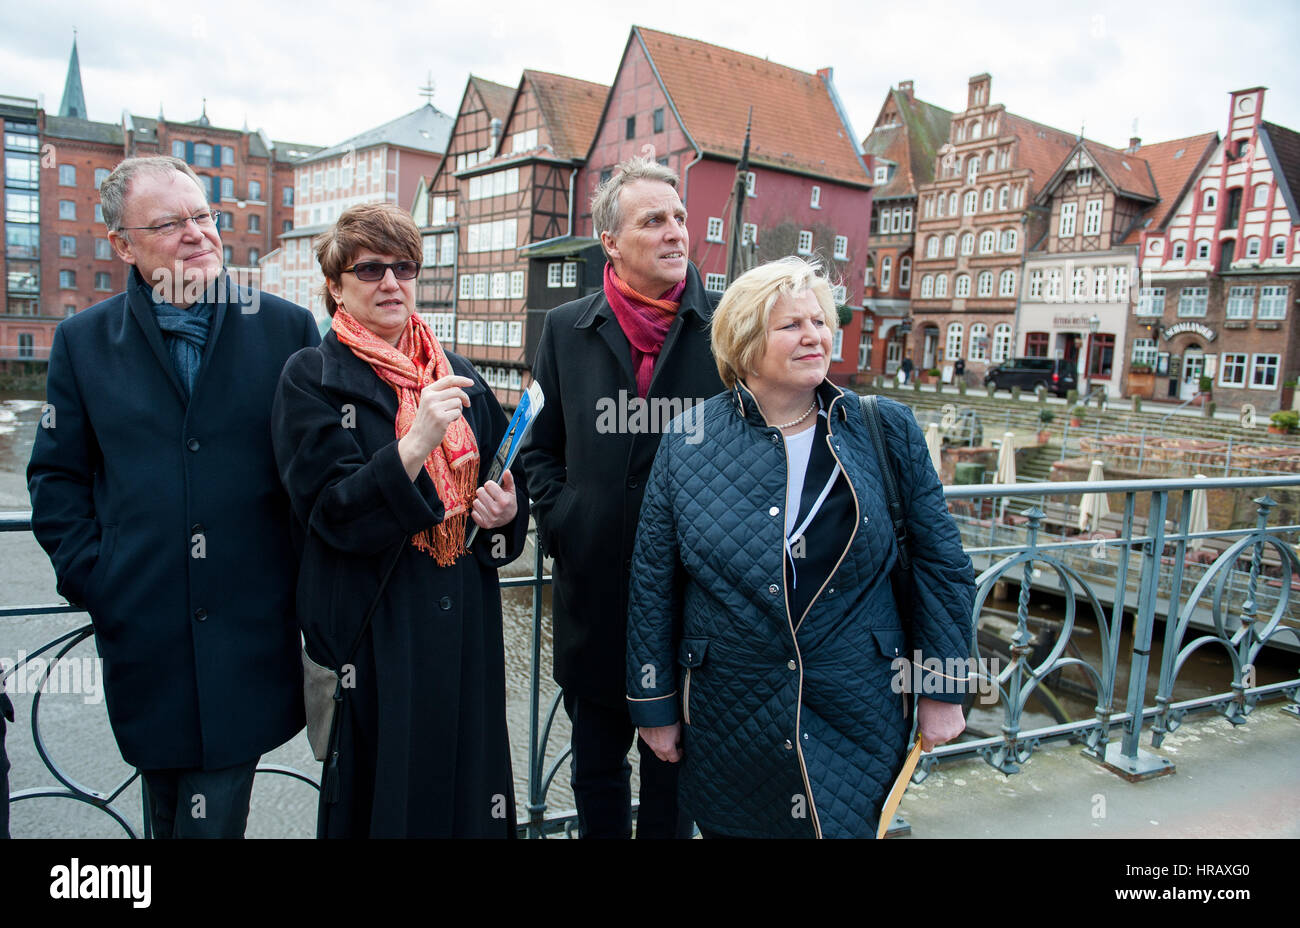 Lueneburg, Germany. 28th Feb, 2017. L-R: The Premier of Lower Saxony Stephan Weil (SPD), the public works commissioner of Lueneburg Heike Gundermann, the environment minister of Lower Saxony Stefan Wenzel (Green Party) and the social minister of Lower Saxony Cornelia Rundt (SPD) in the historic centre of Lueneburg, Germany, 28 February 2017. Photo: Philipp Schulze/dpa/Alamy Live News Stock Photo